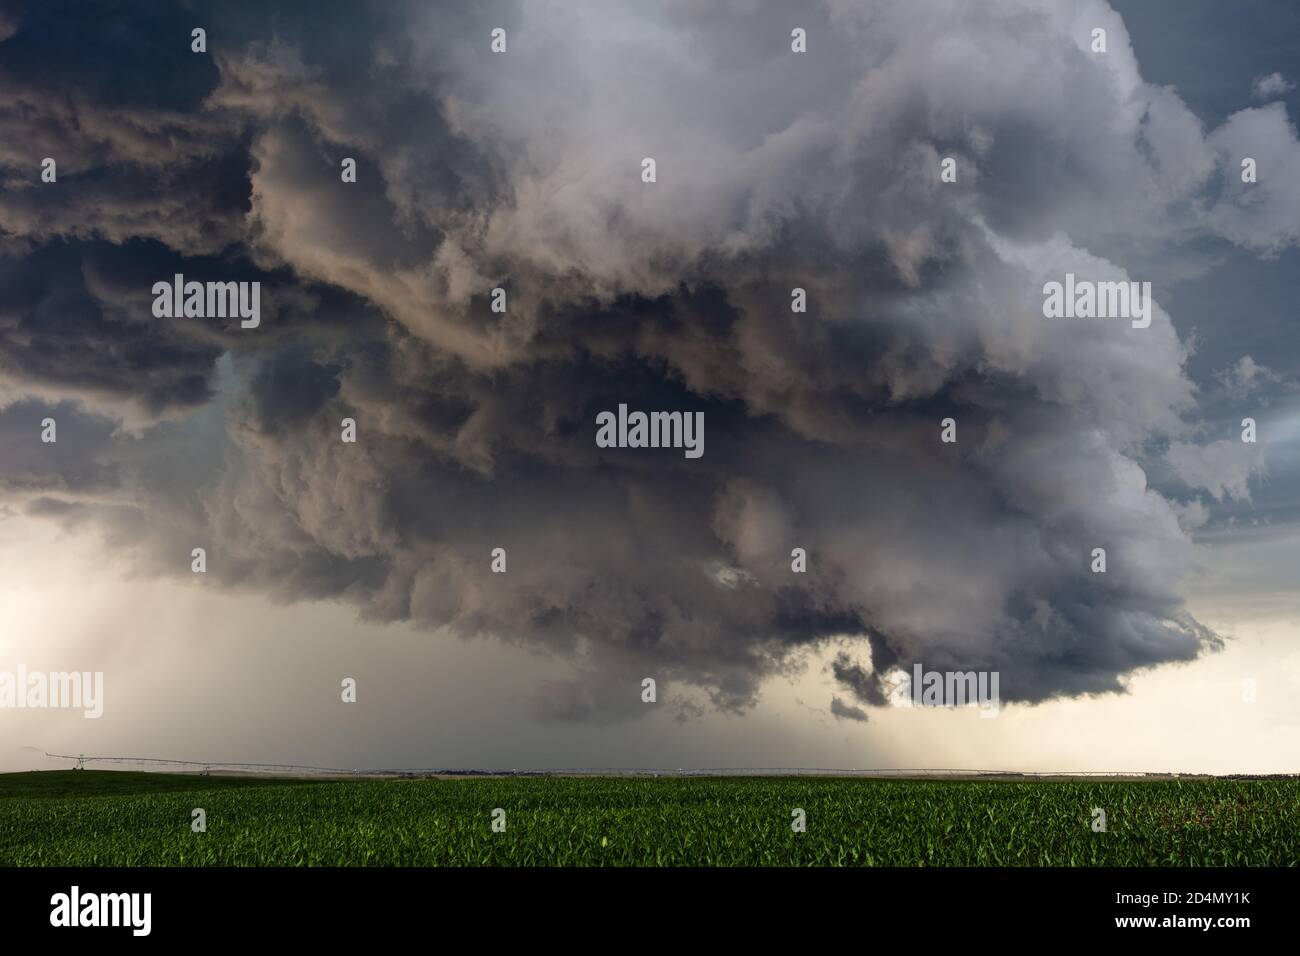 Dramatic dark storm clouds in the sky with rain falling over a field in the Great Plains near Valentine, Nebraska Stock Photo